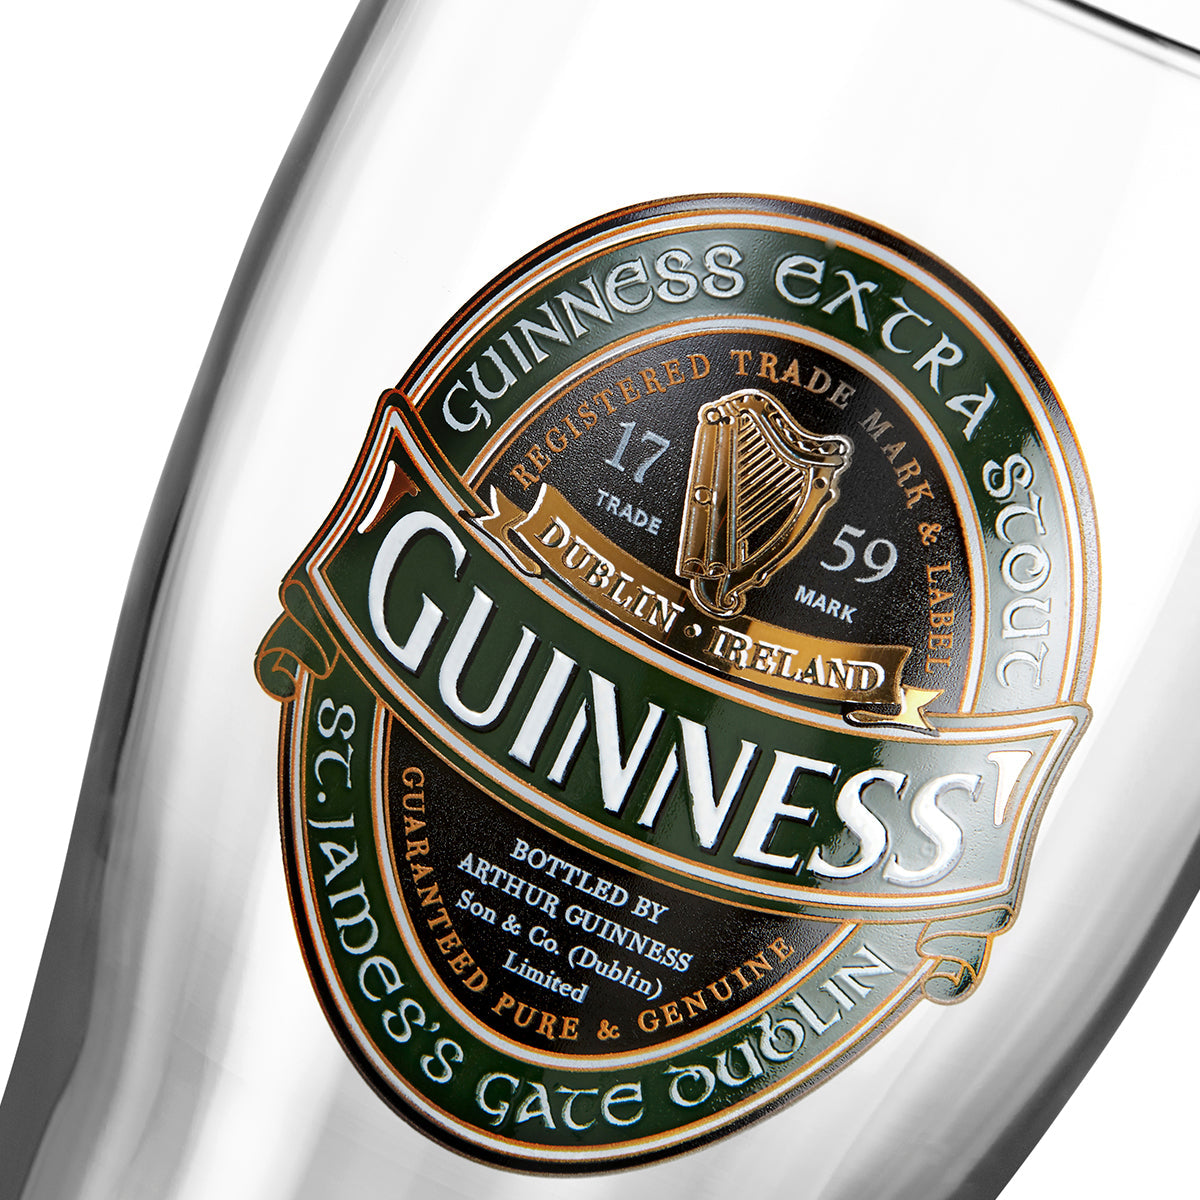 Guinness Ireland Collection Pint Glass - 6 Pack